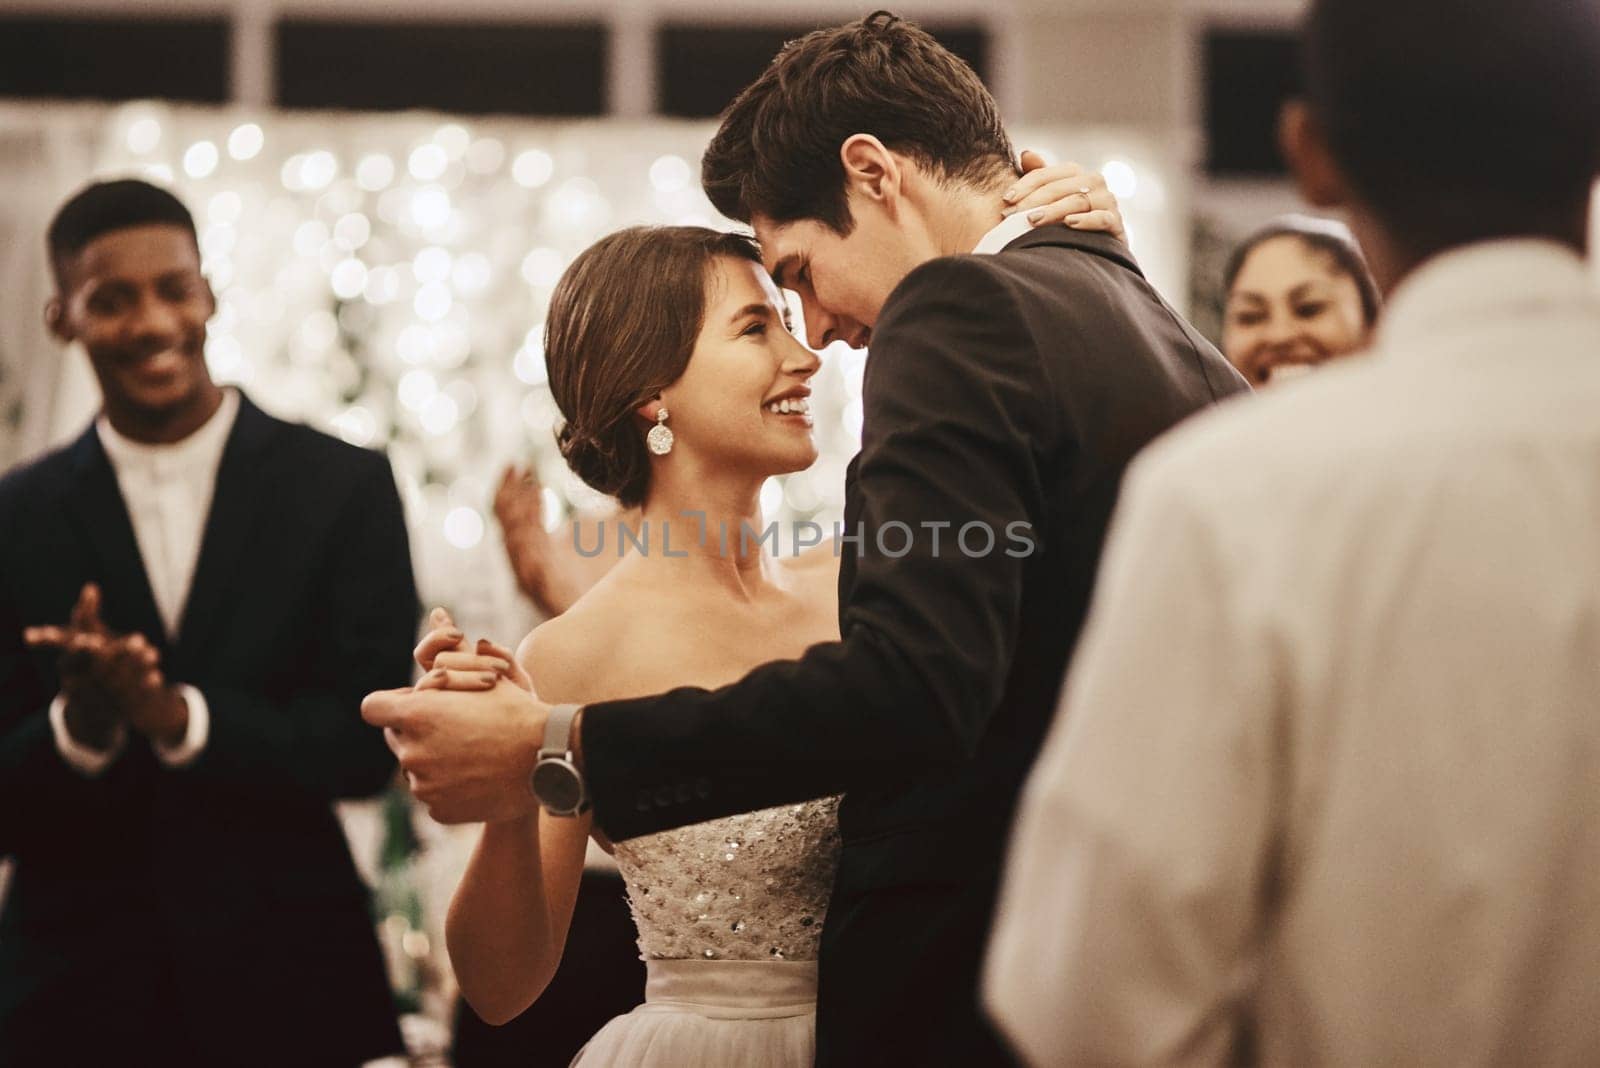 Love, wedding and happy couple doing a dance together for tradition at a marriage reception. Happiness, smile and young husband and wife dancing with intimacy at ceremony party, event or celebration